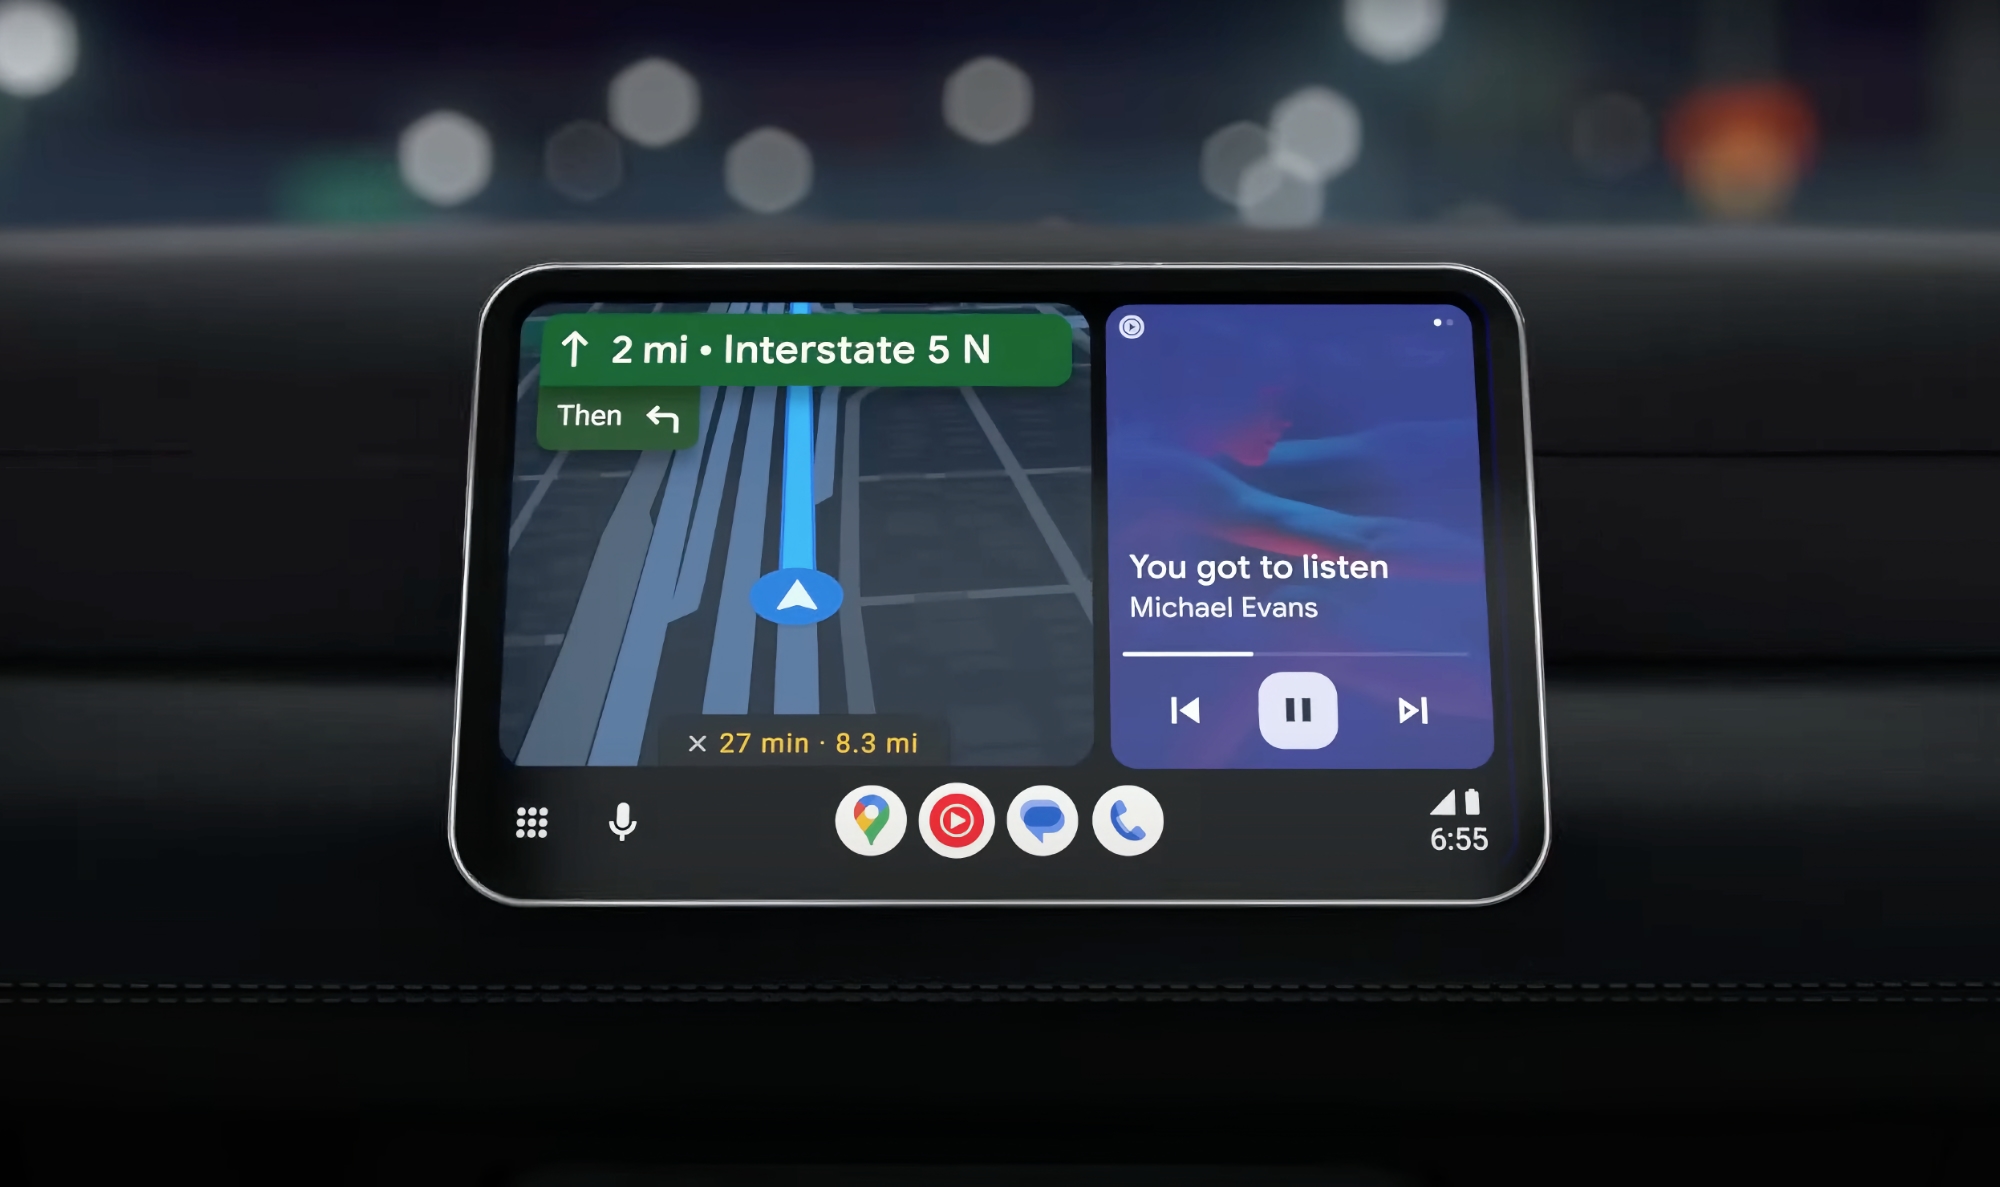 Finally, Google has released a new version of Android Auto for all users